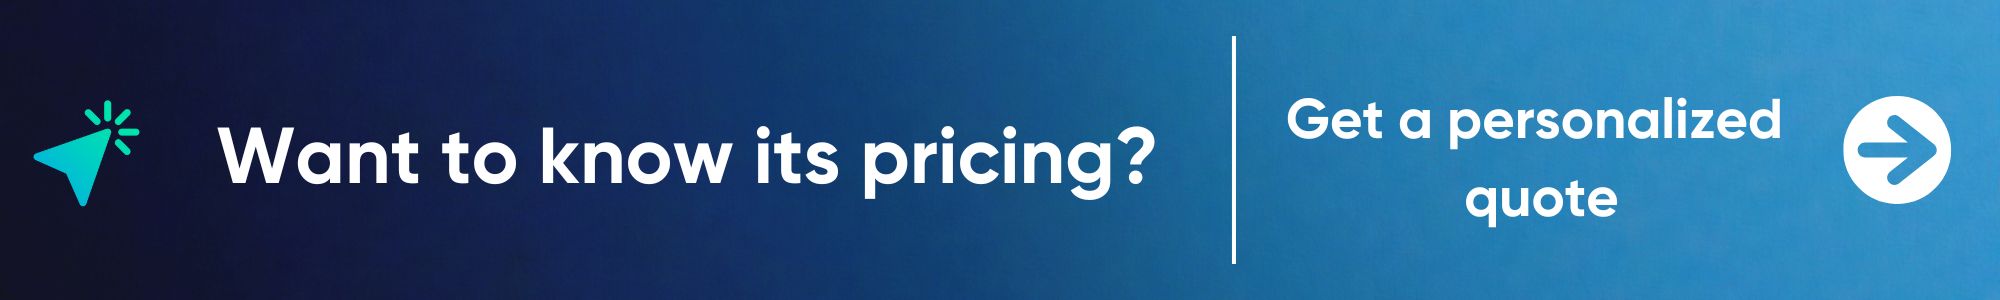 CTA for pricing